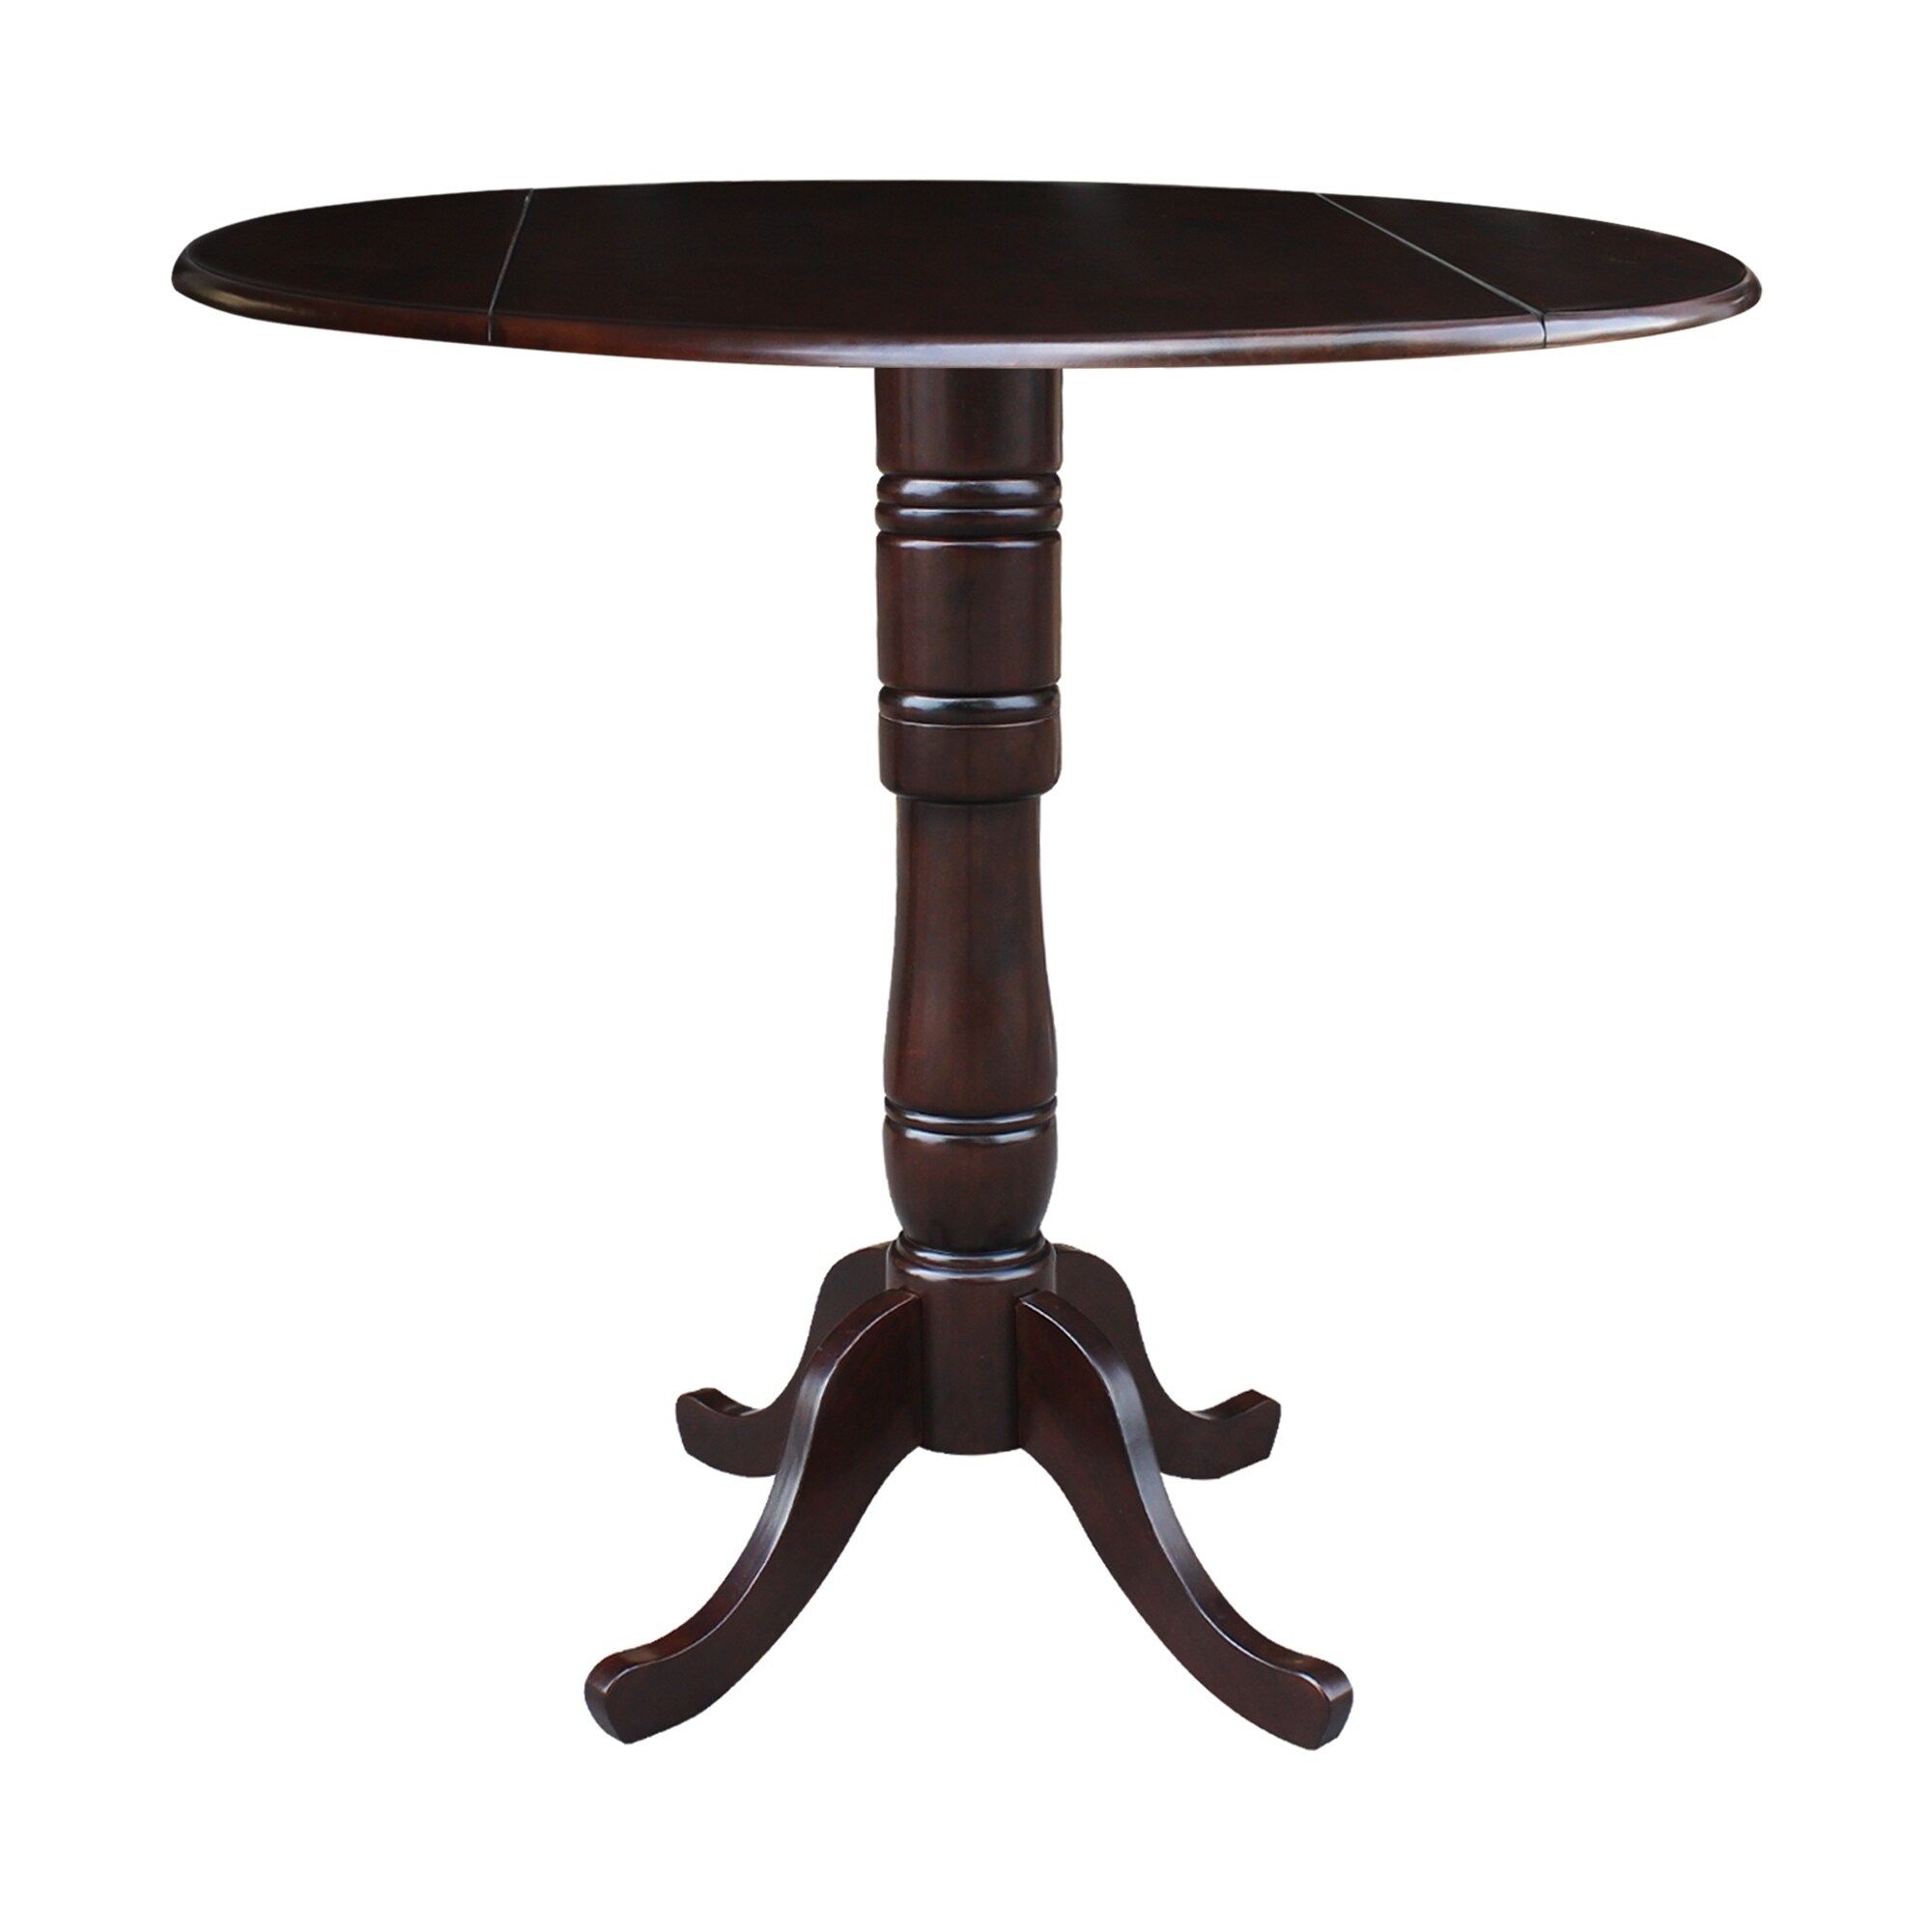 42" Round Dual Drop Leaf Pedestal Table In Rich Mocha Intended For Recent Round Dual Drop Leaf Pedestal Tables (View 5 of 15)